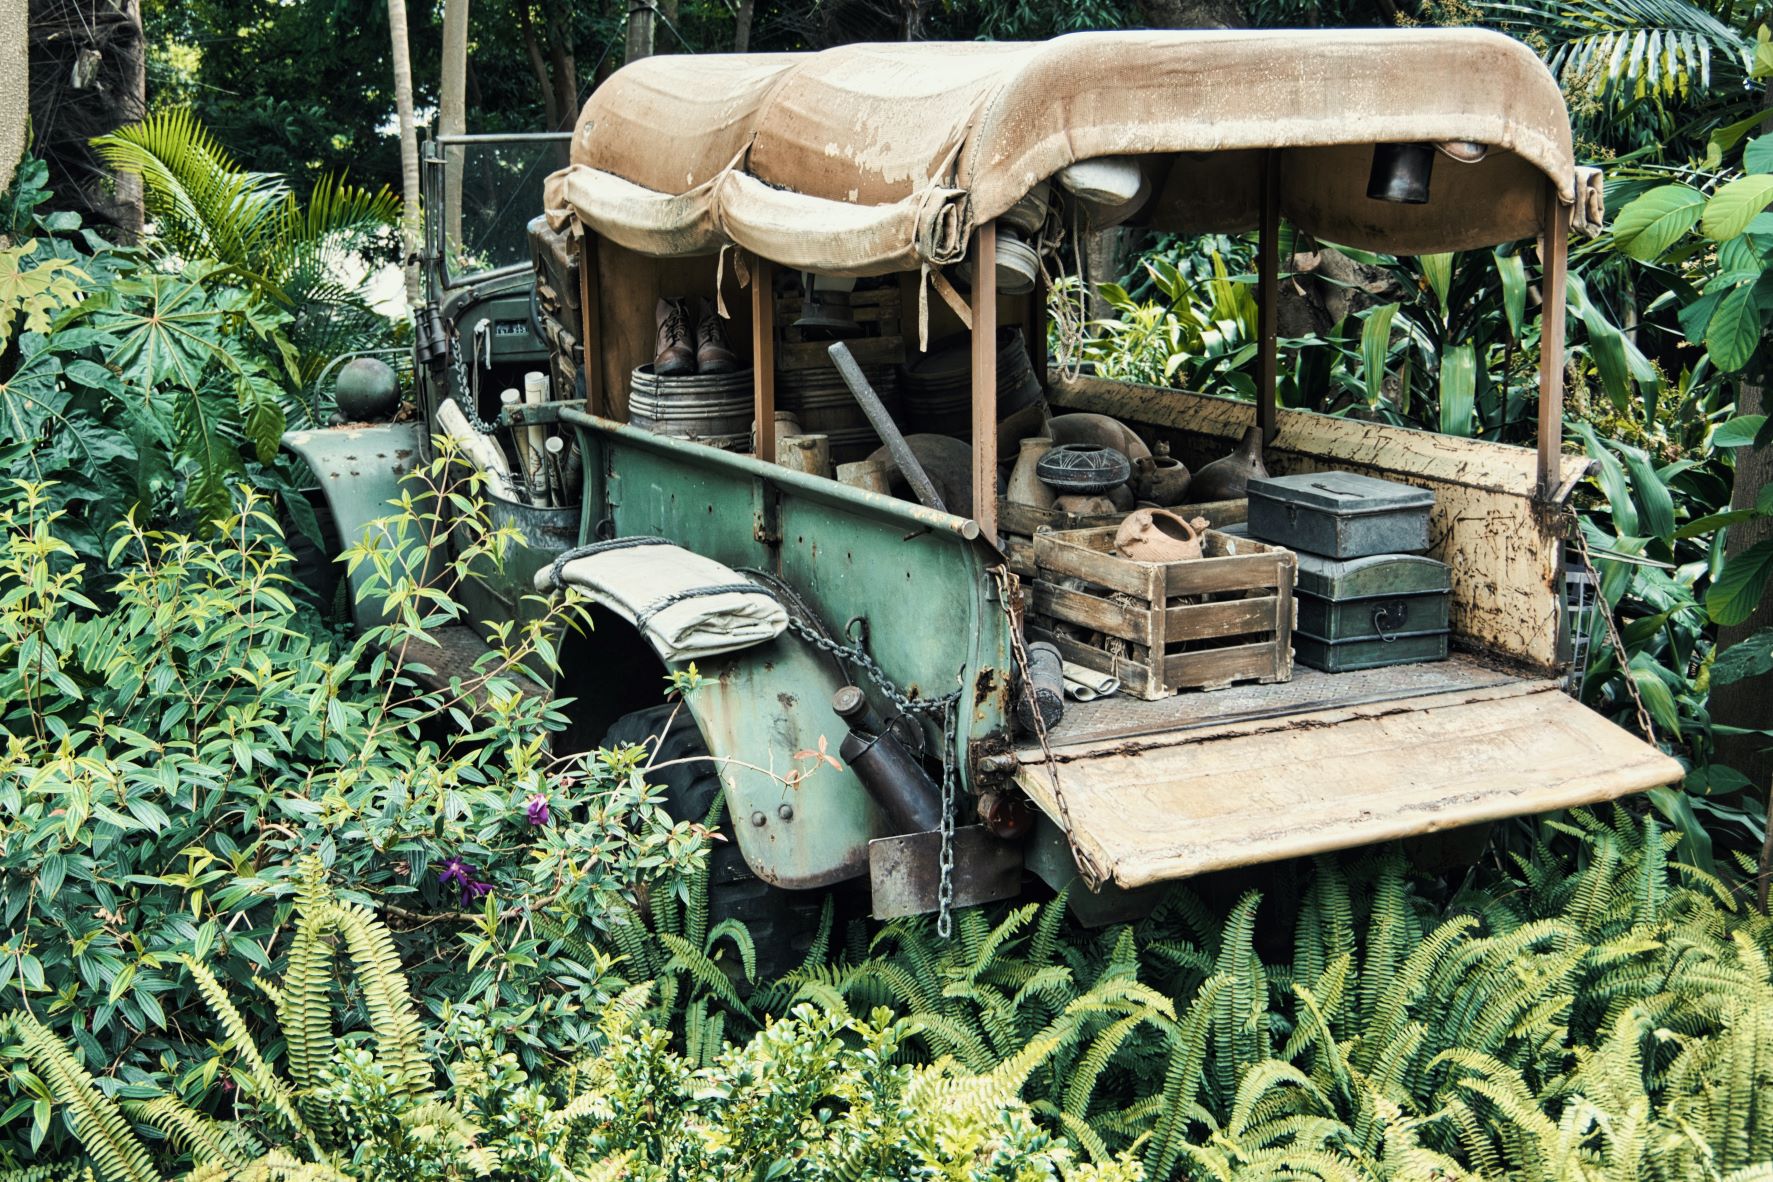 Old truck with supplies in the back in the jungle